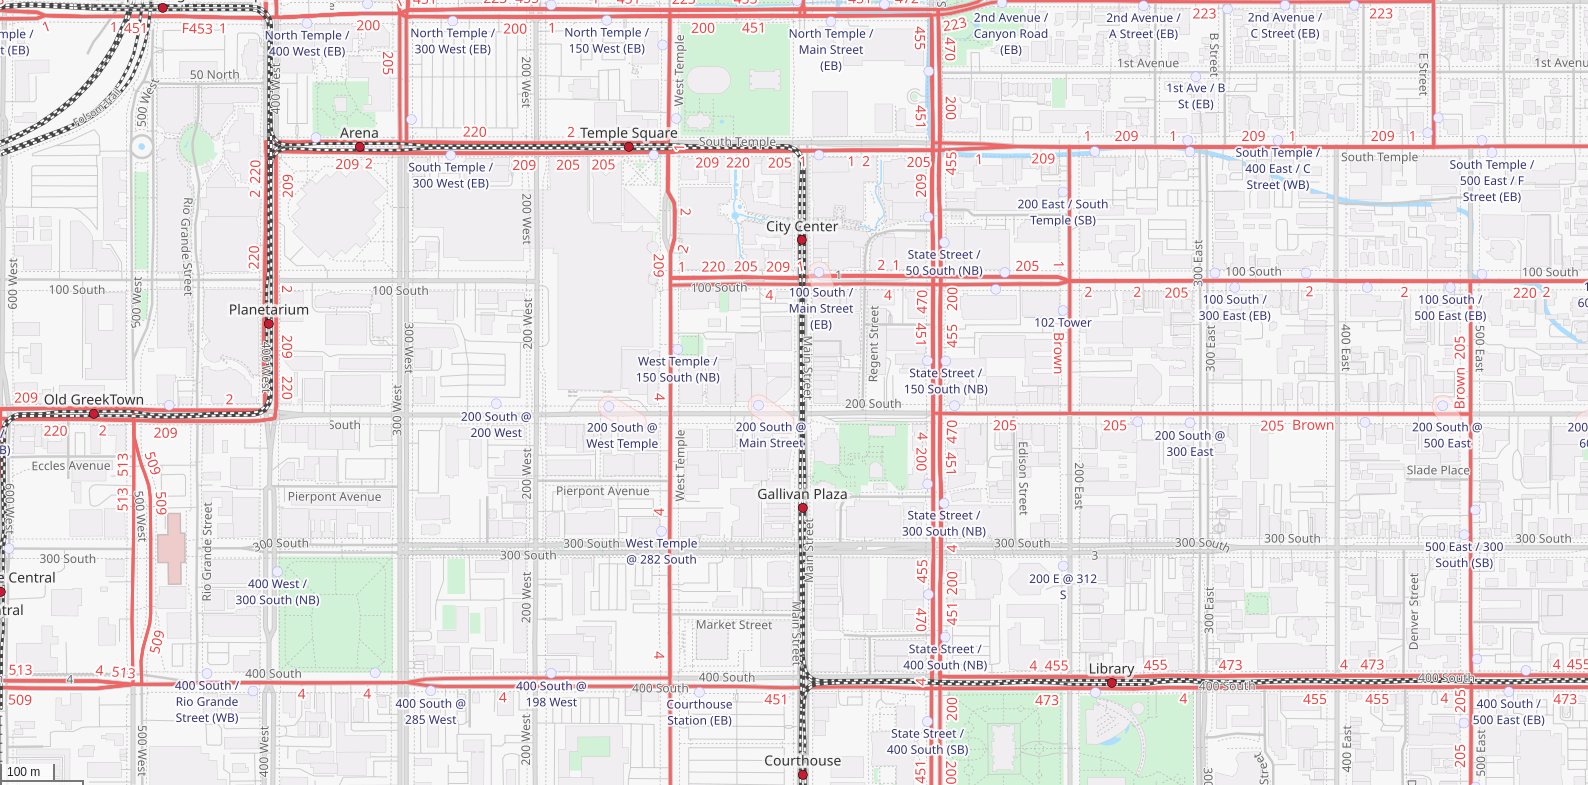 Salt Lake City on openstreetmap.org in the Transport Map style. Bus routes are drawn with red lines, and rails in dashed black, with everything else more faded than other styles.